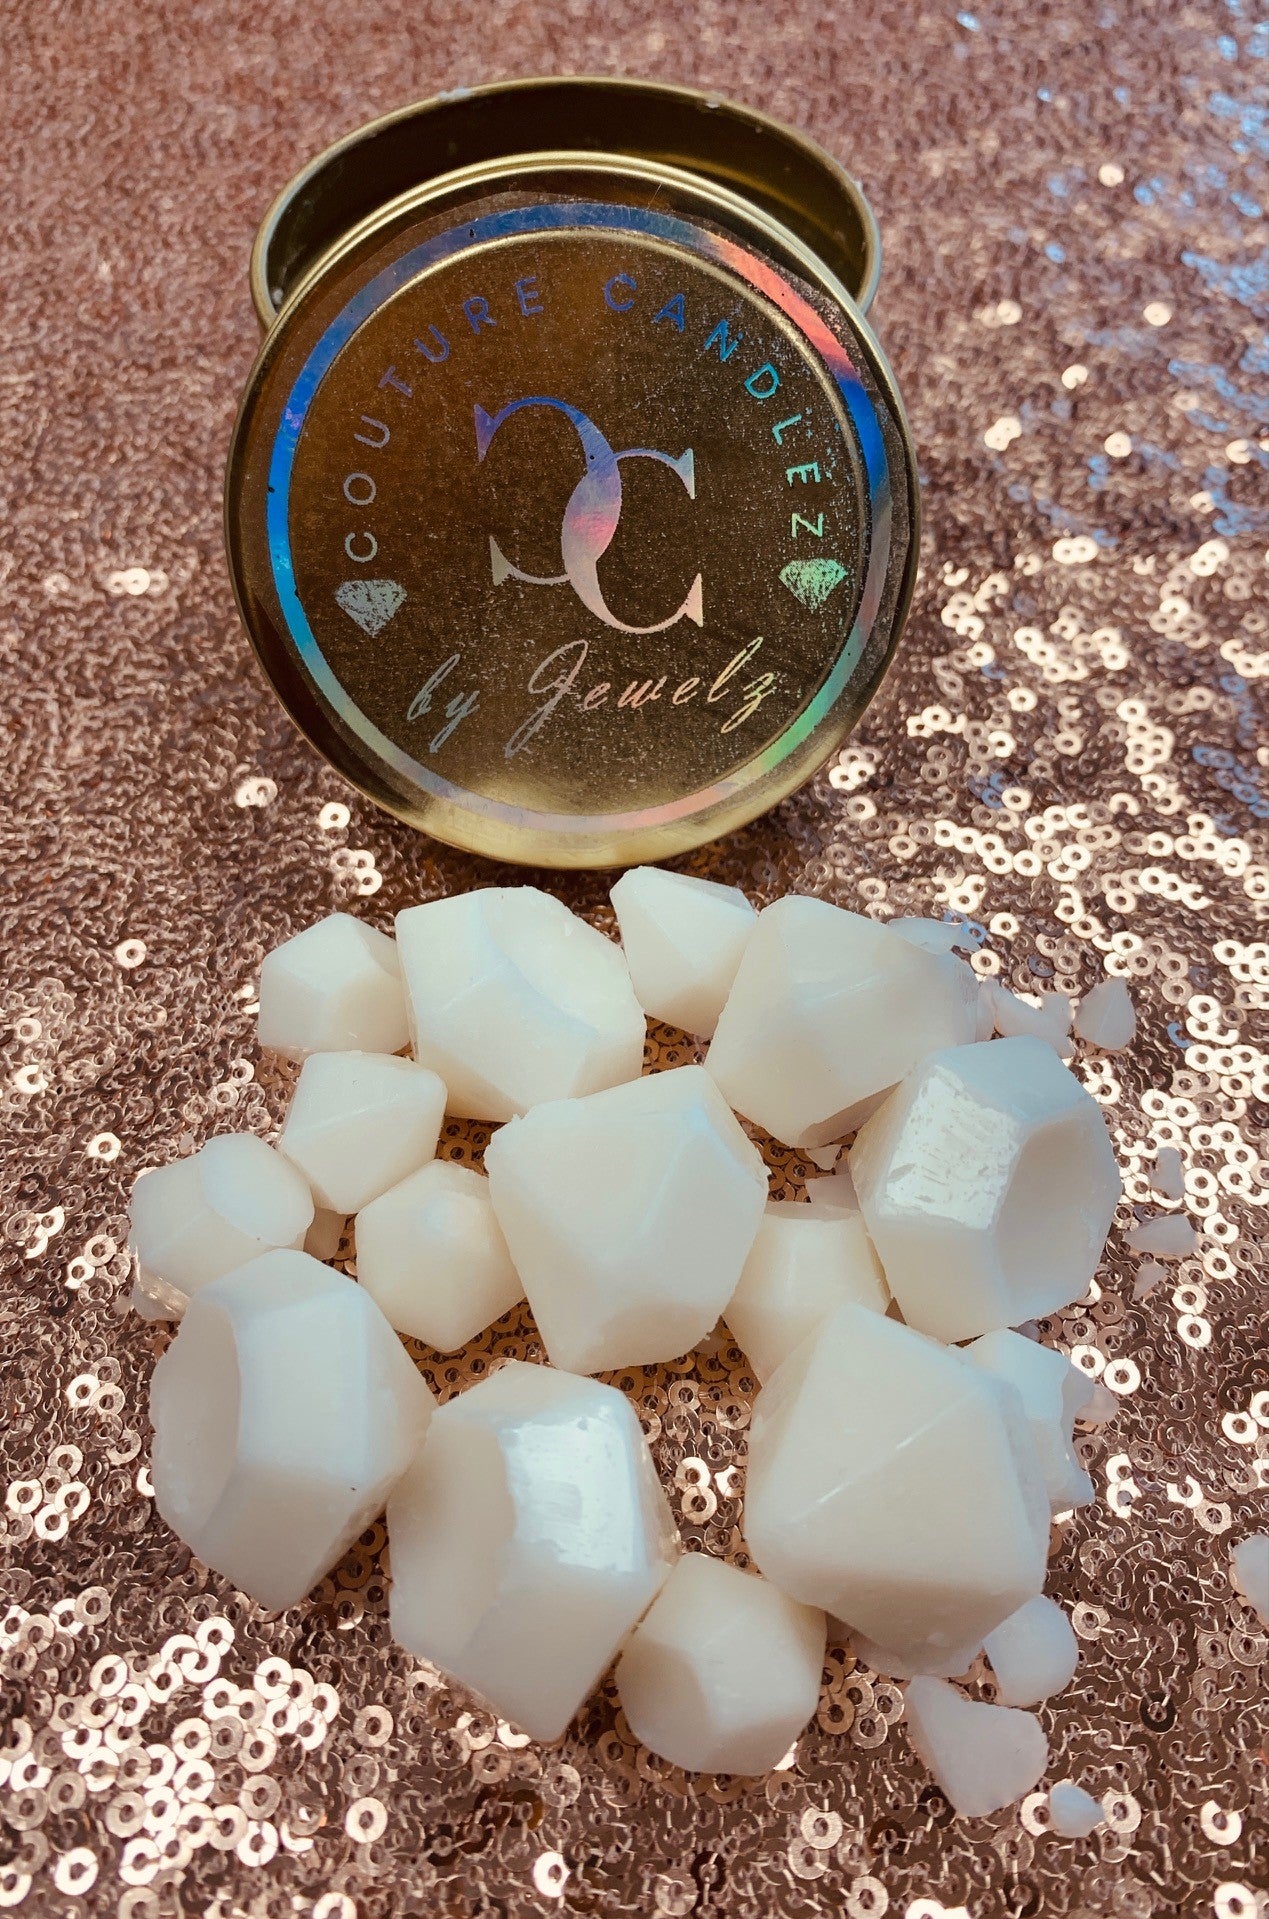 Couture Candlez by Jewelz luxury wax melts with notes of amber, bergamot, & leather (Onyx Oasis)